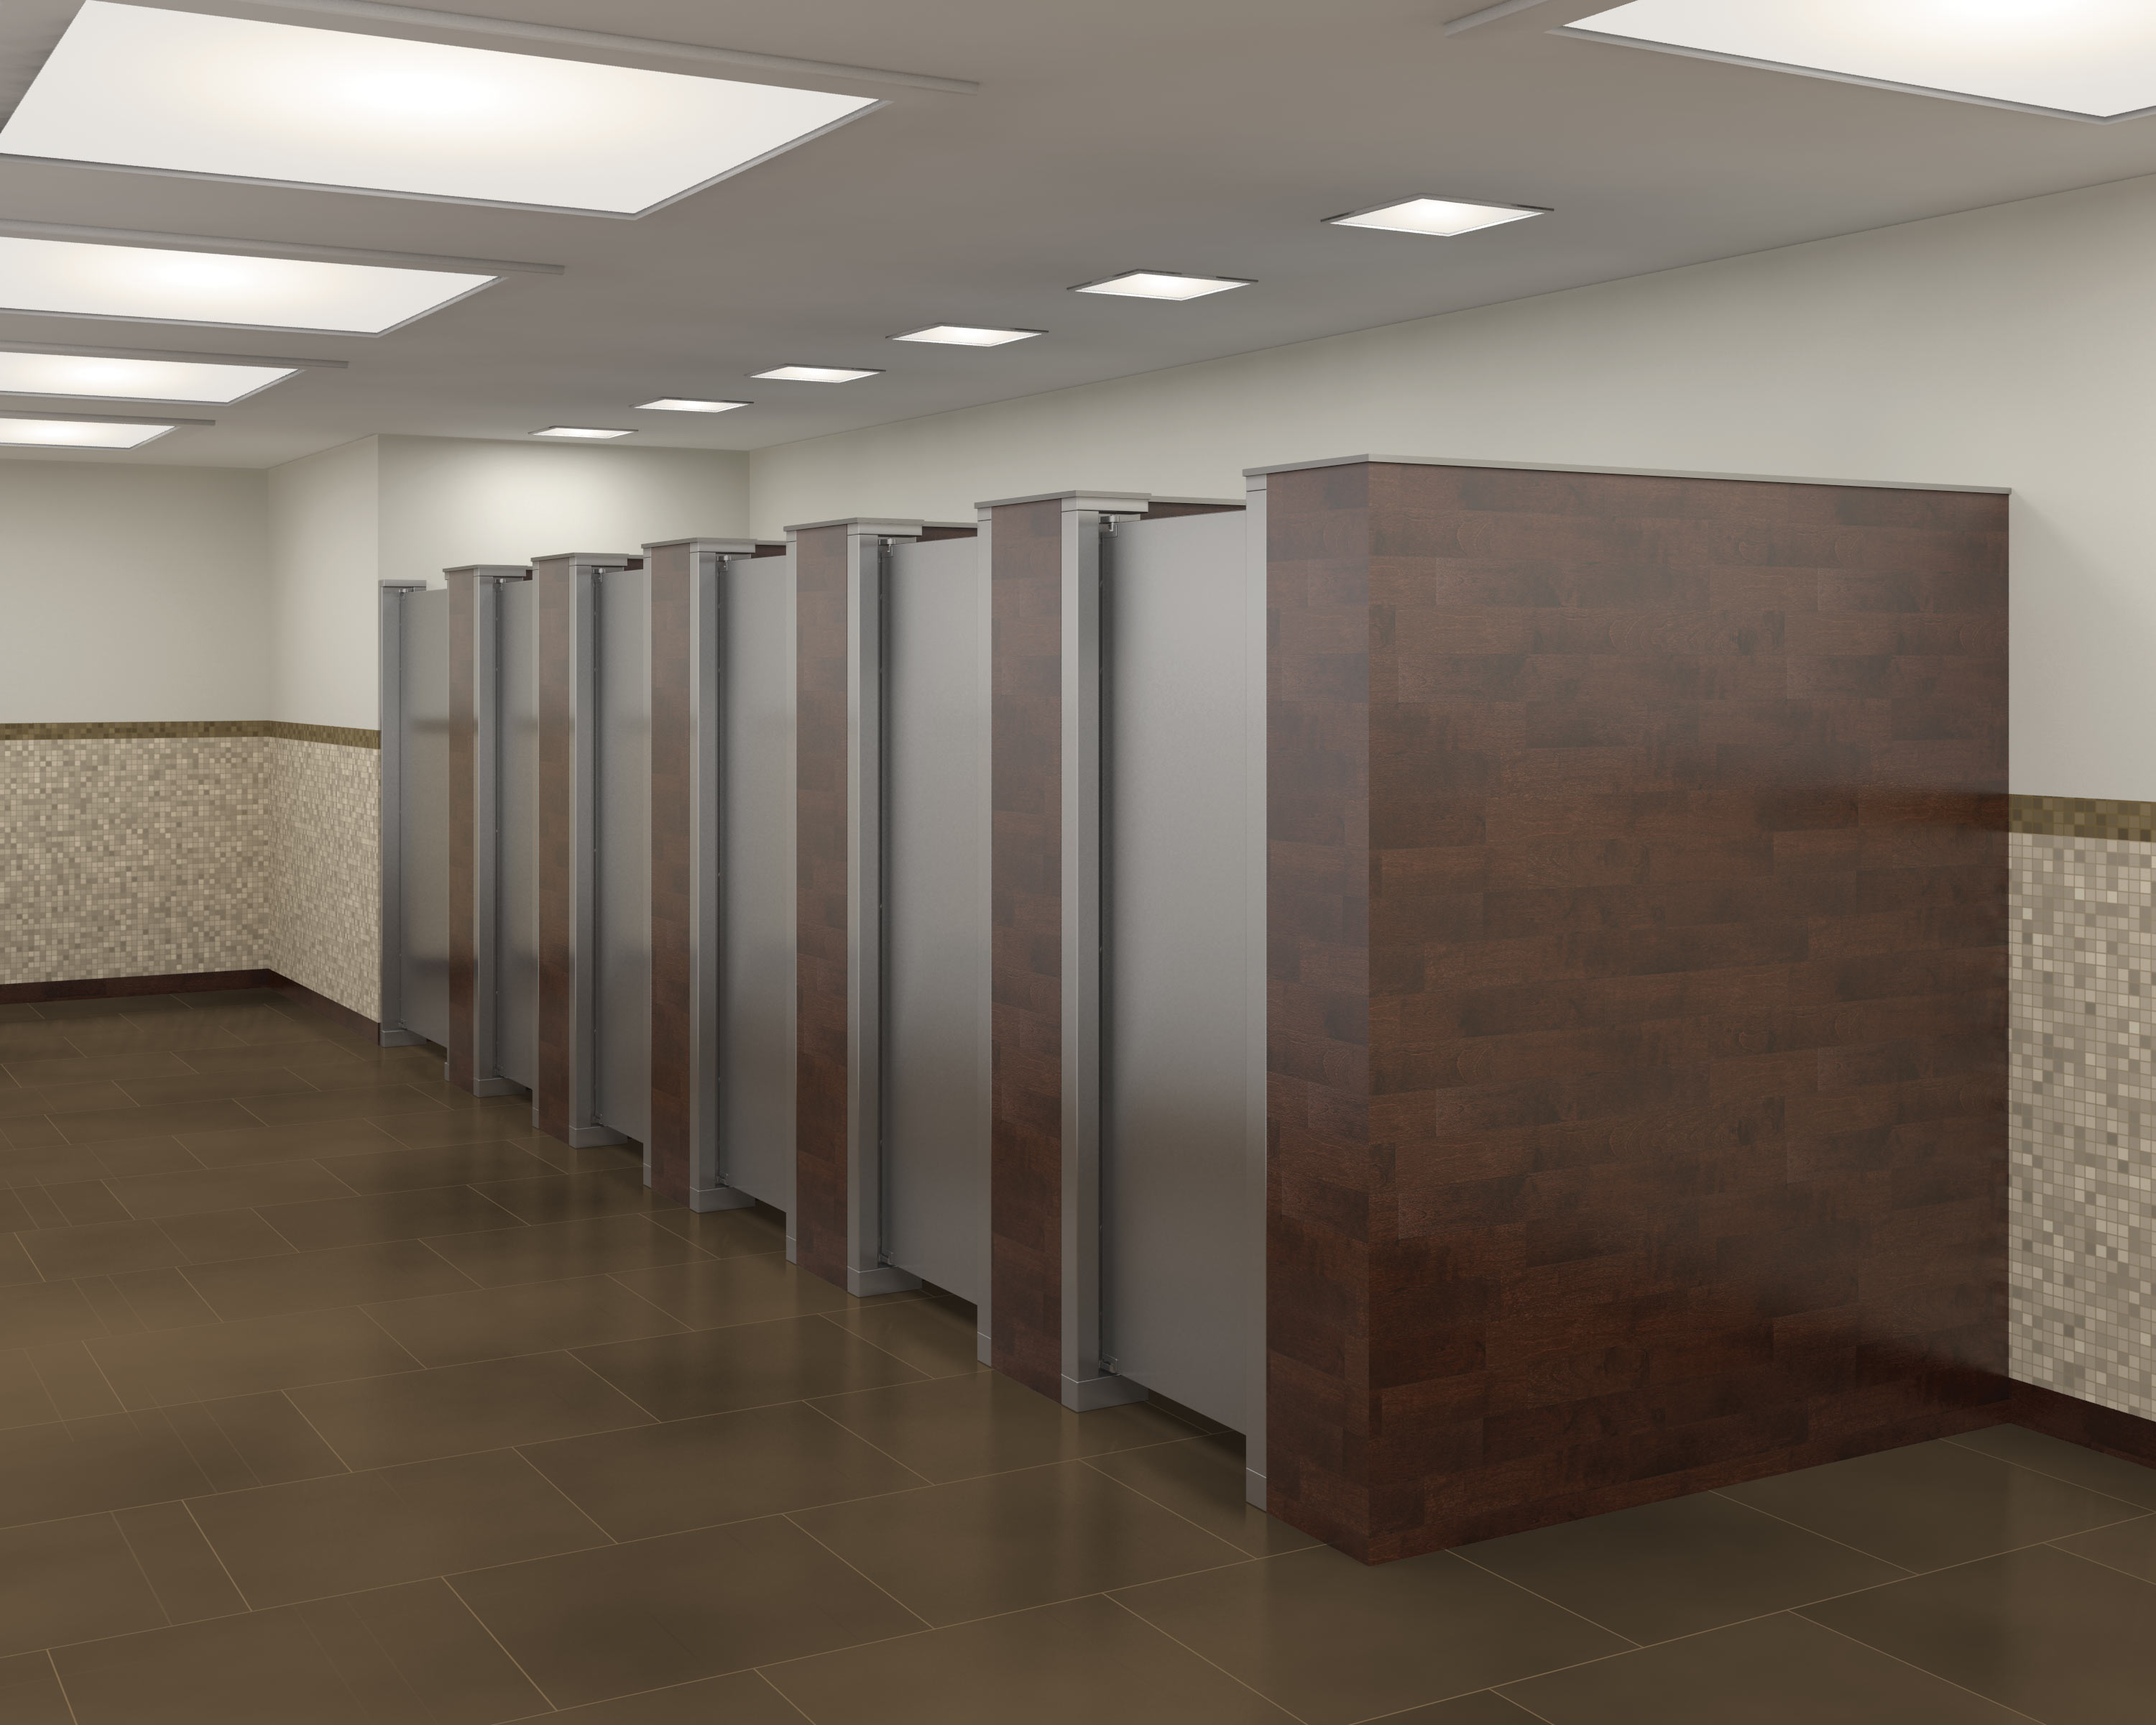 Stainless steel partitions doors with solid walls between the stalls